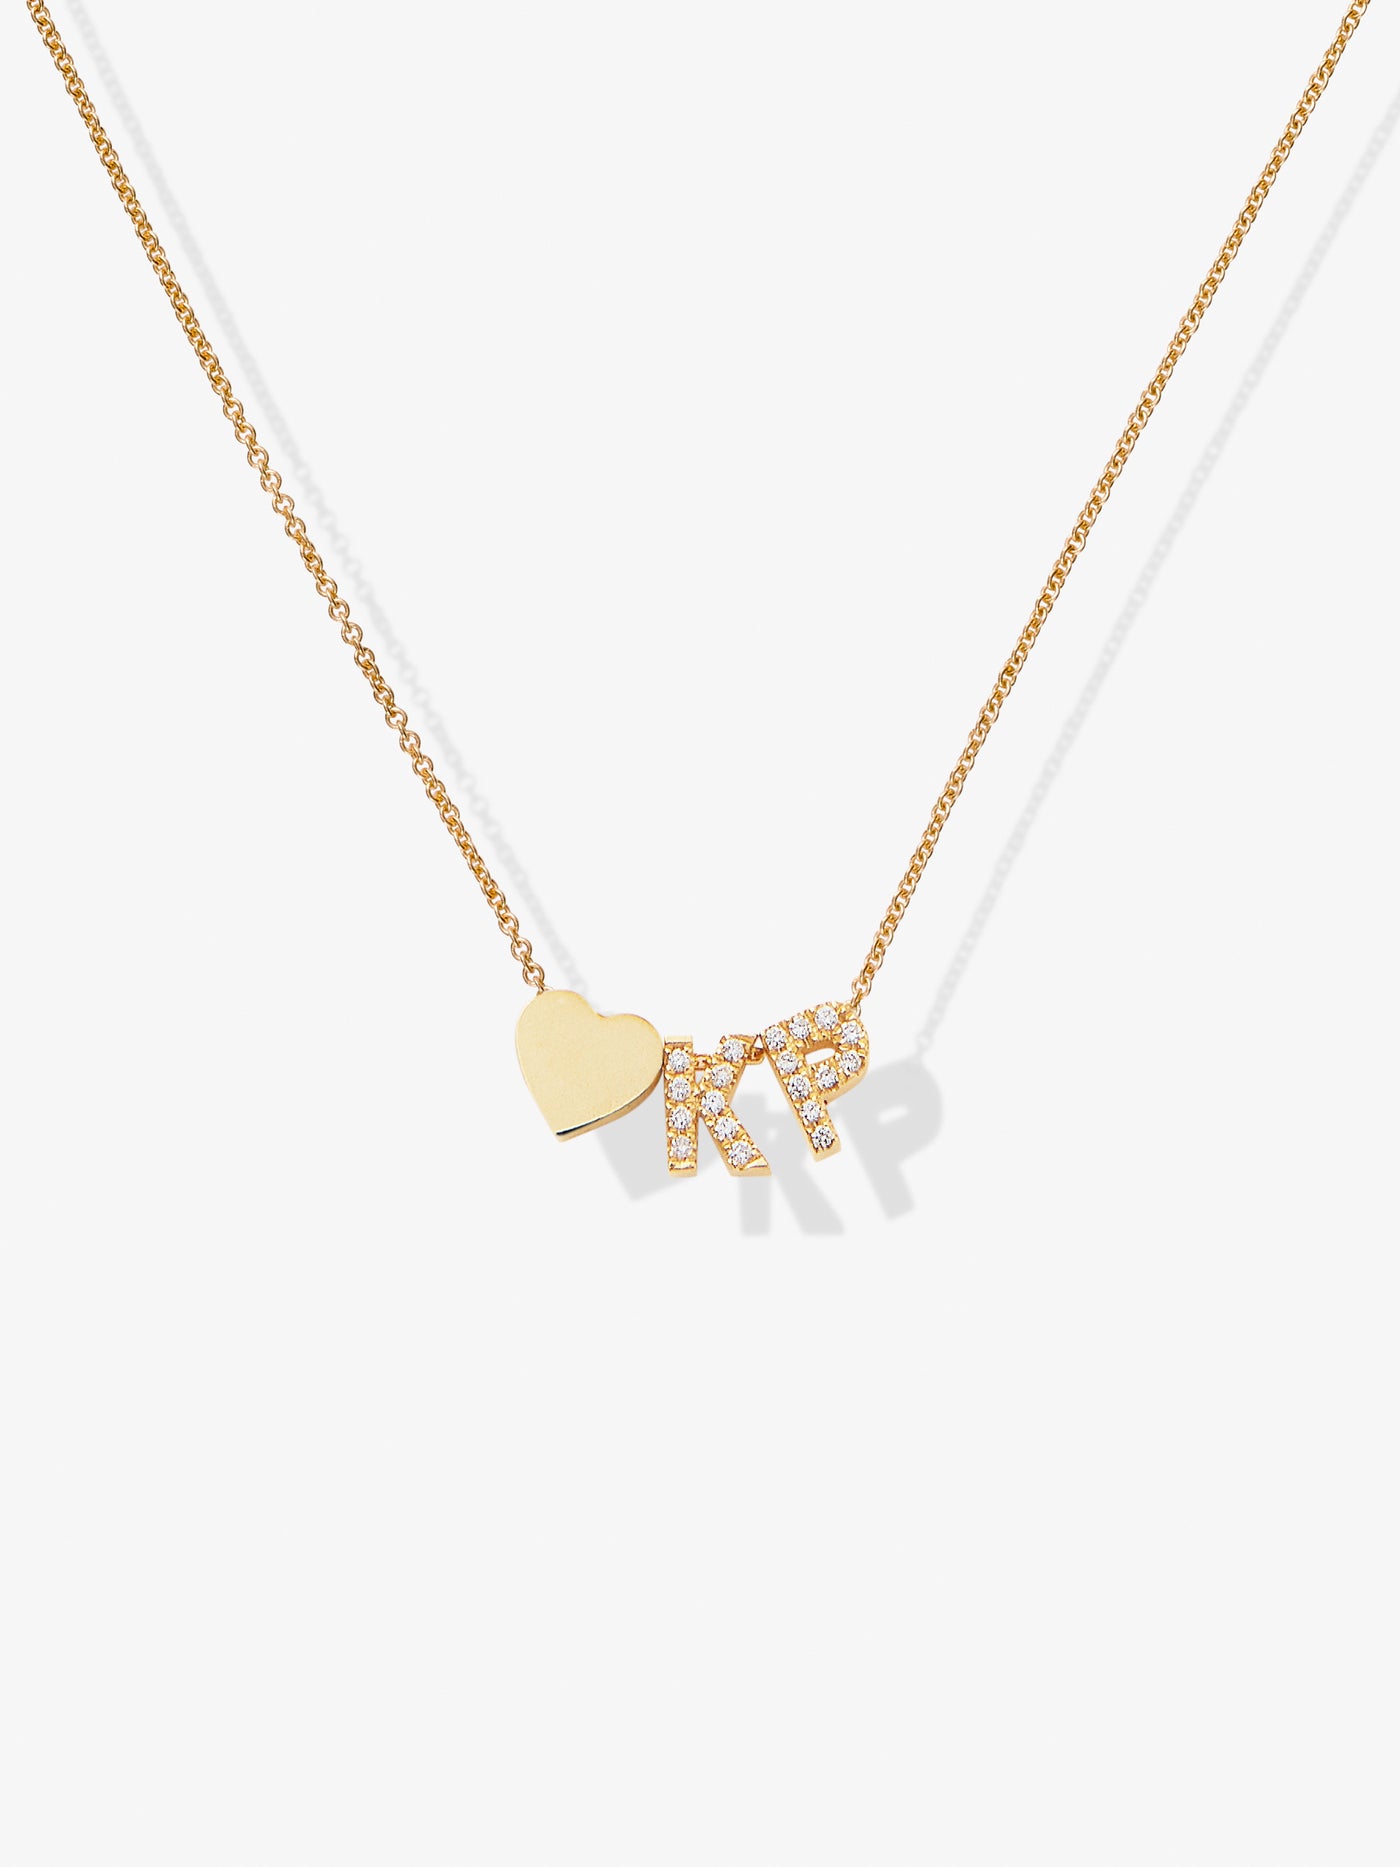 Two Letters and Heart in Diamonds and 18k Gold